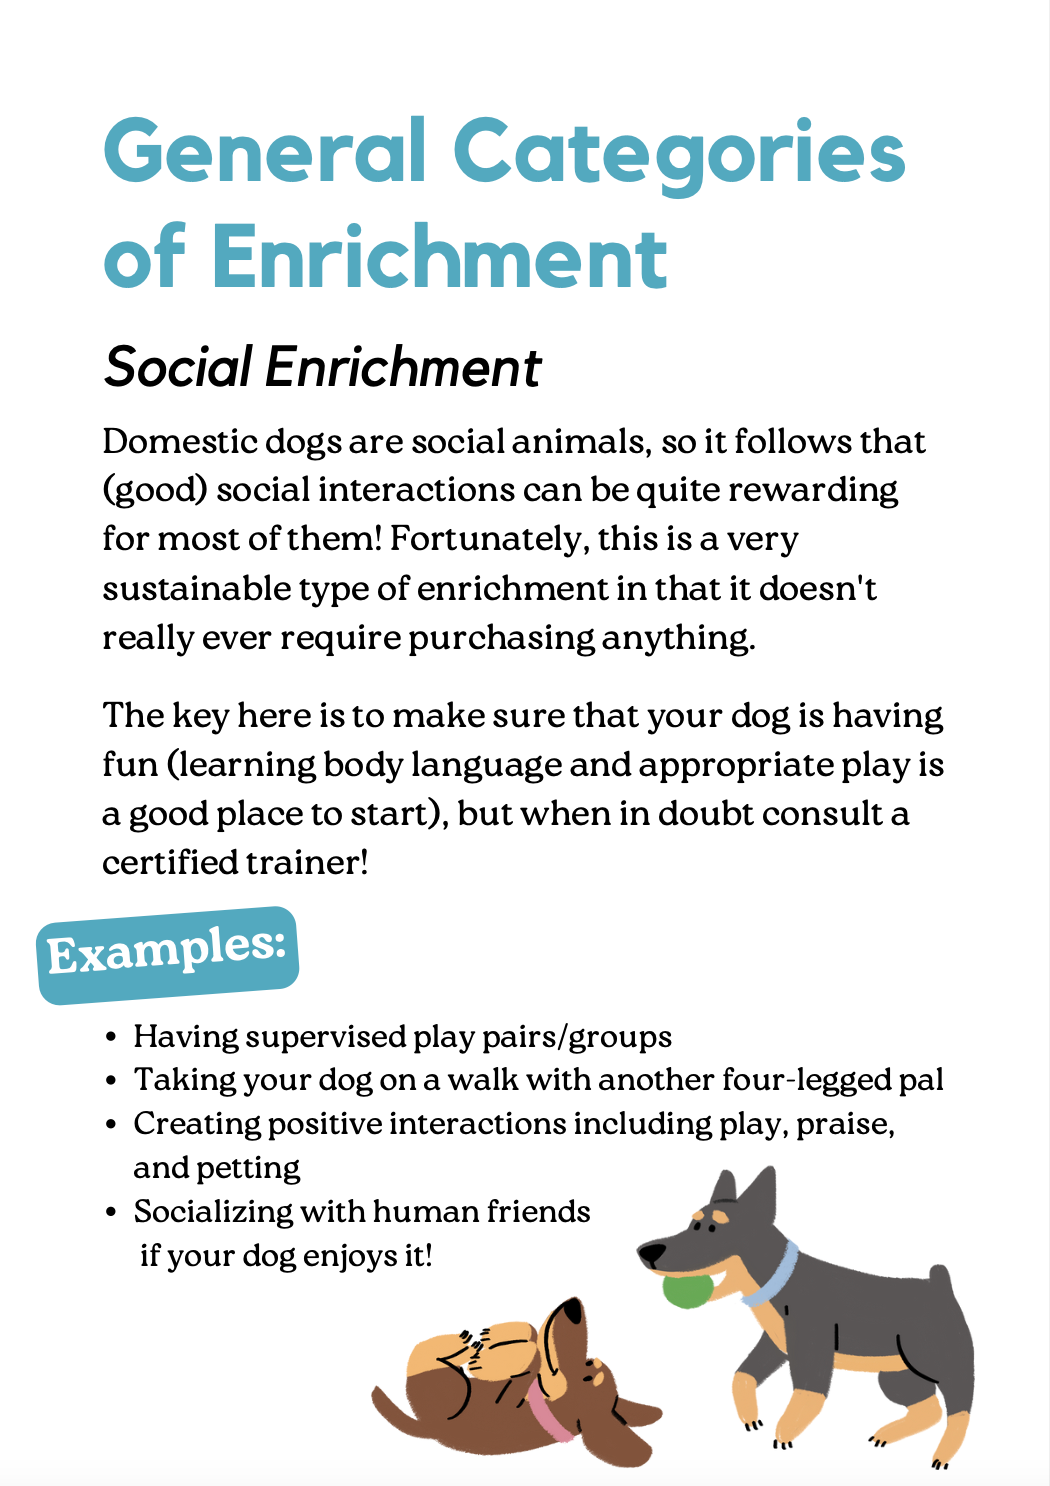 Guide to Sustainable Enrichment for Dogs by Briahna Hendey